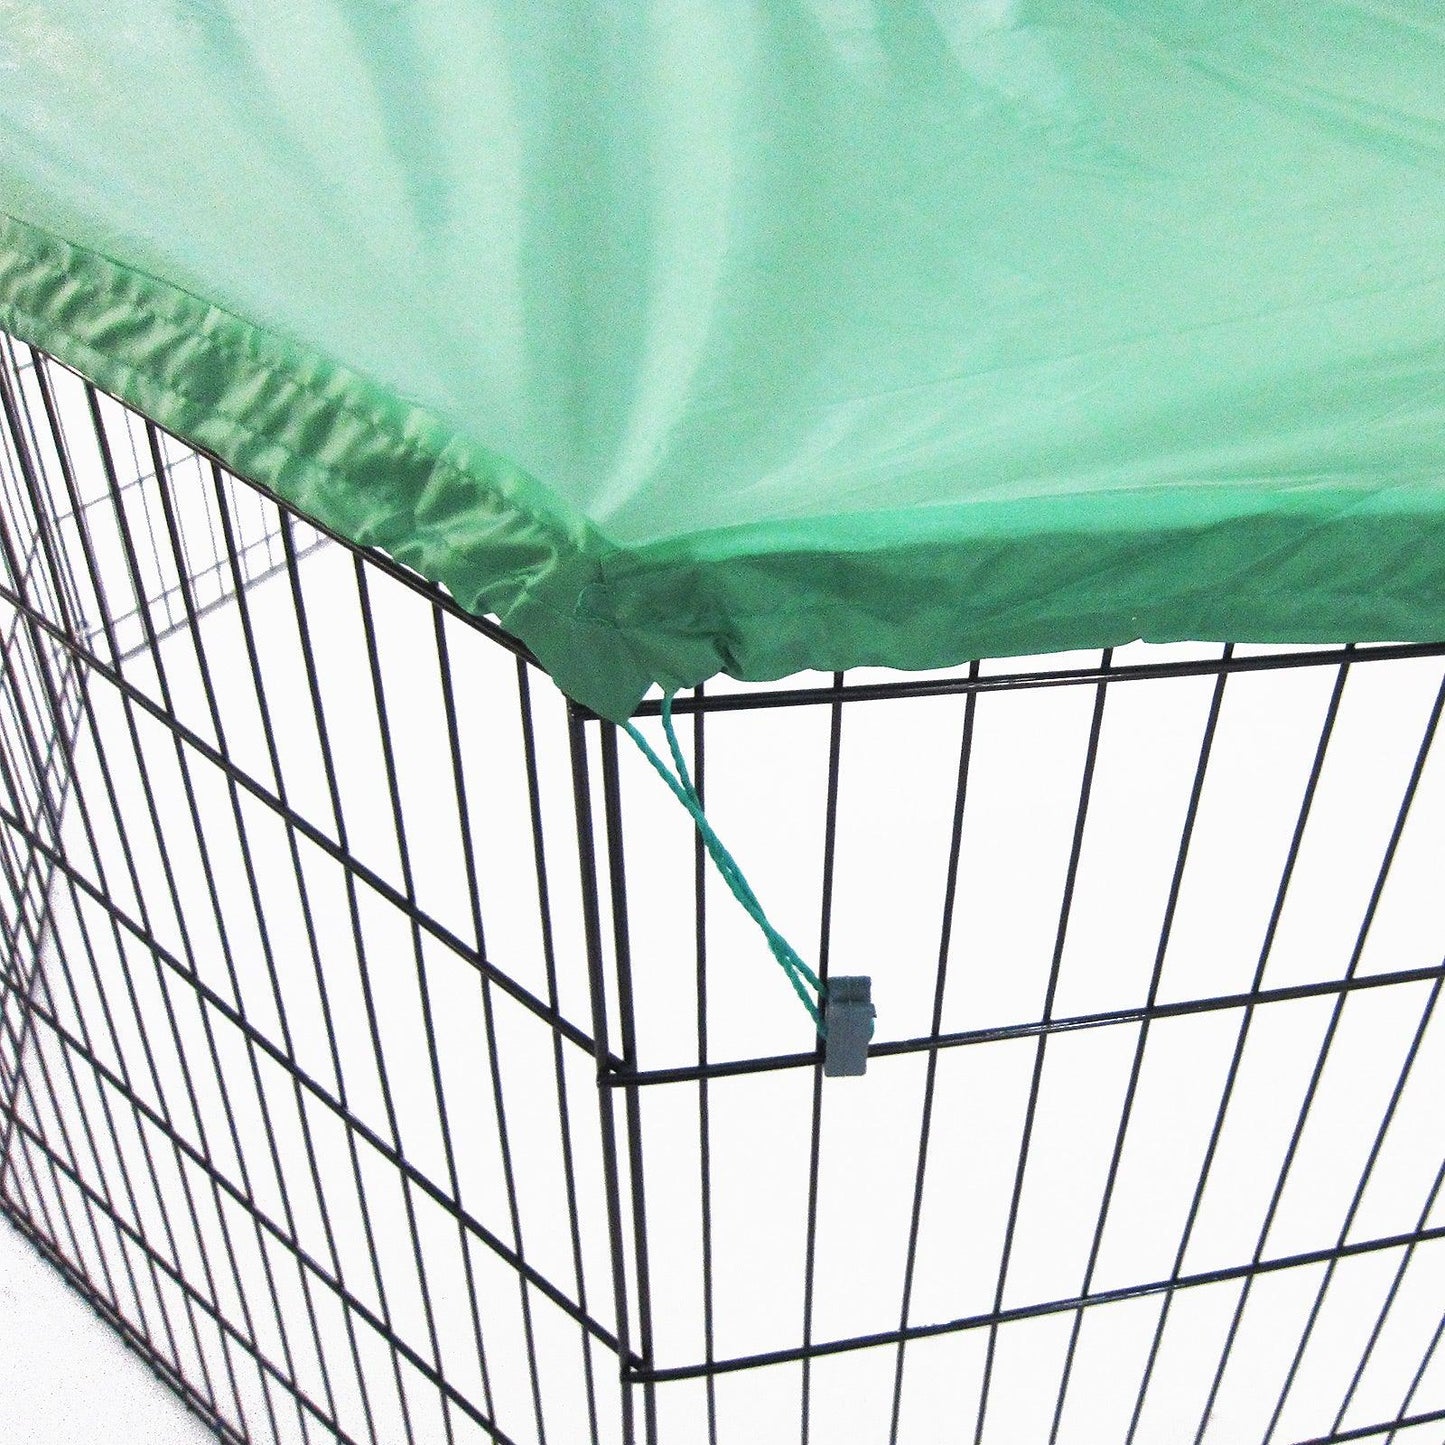 Paw Mate Green Net Cover for Pet Playpen 30in Dog Exercise Enclosure Fence Cage - Pet Parlour Australia